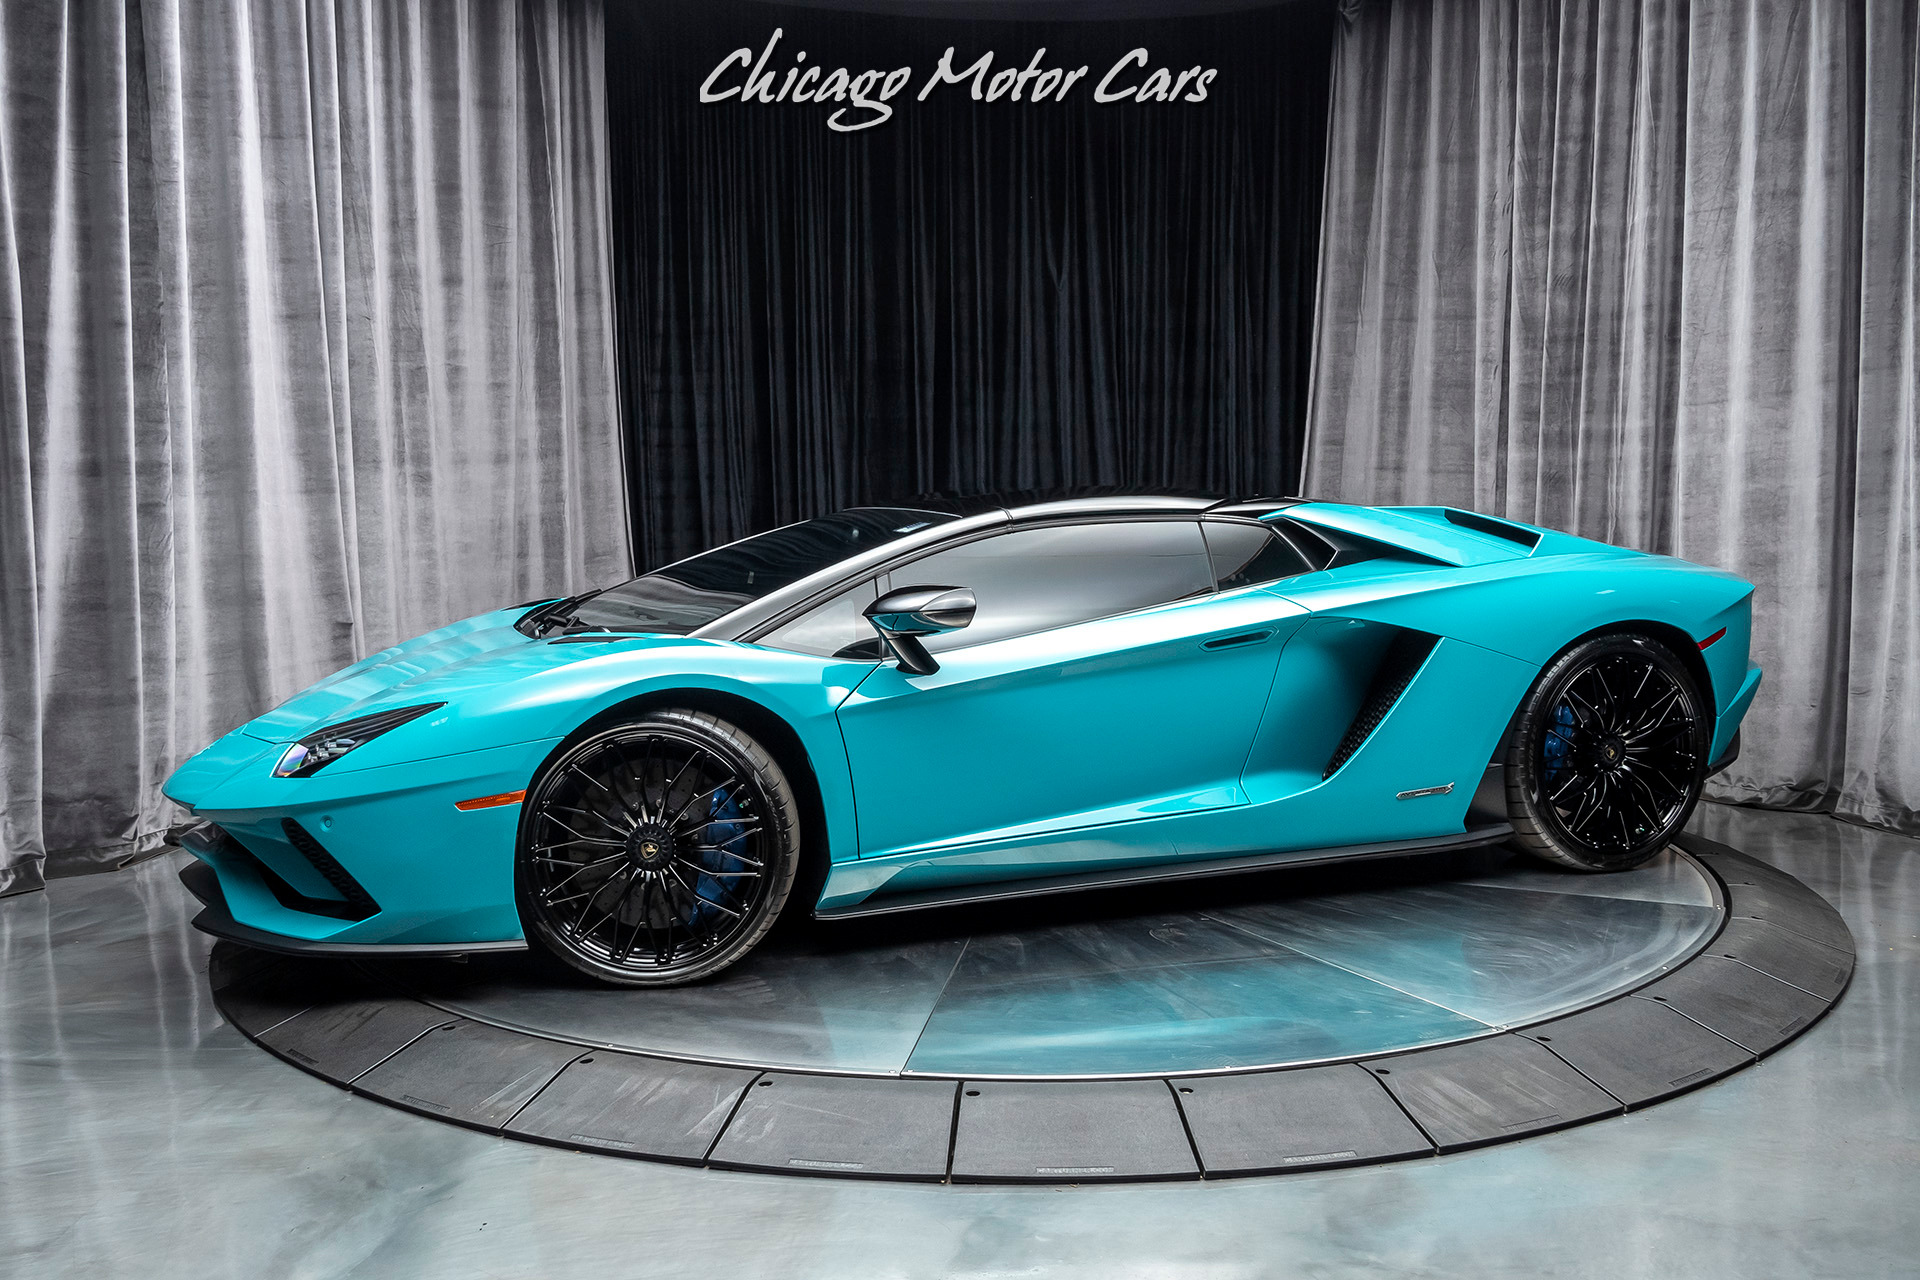 Used 2019 Lamborghini Aventador S LP740-4 S Roadster Entire Body PPF  Perfect Serviced LOADED Rare Color! For Sale (Special Pricing) | Chicago  Motor Cars Stock #18097